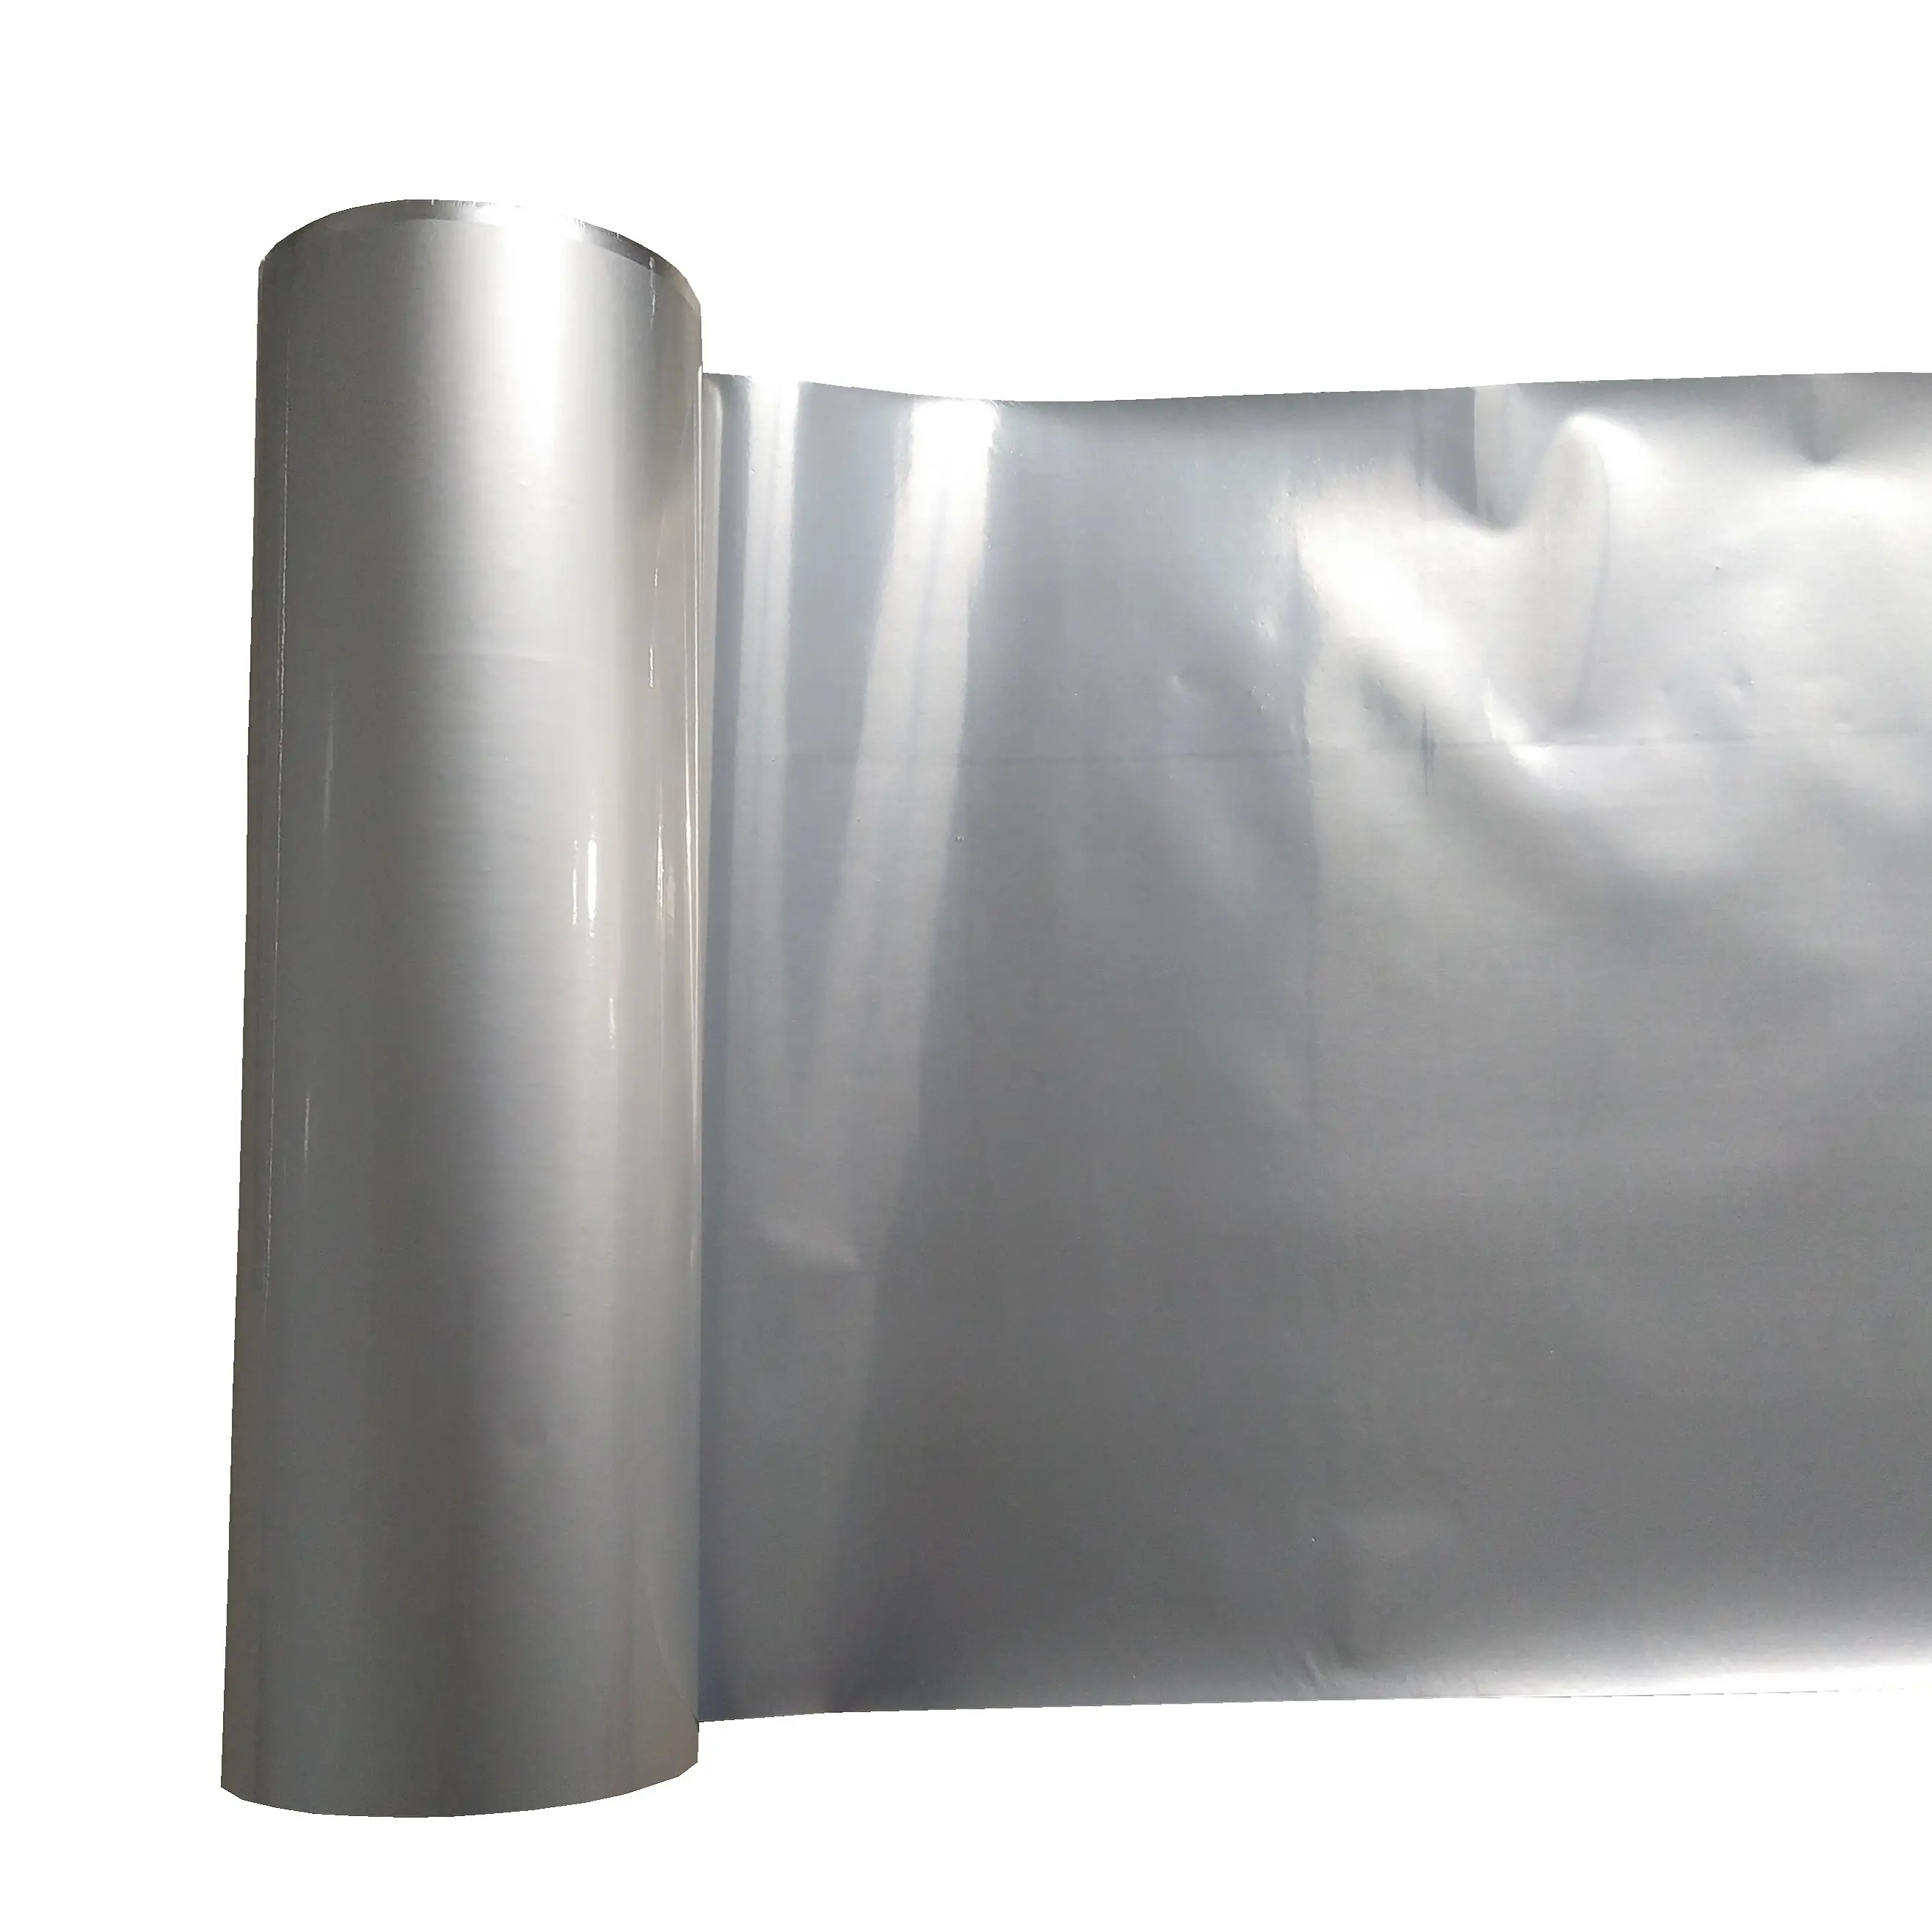 Vietnamese factory whole sale laminated PET/PE/BOPP/CPP plastic film roll packaging material best price